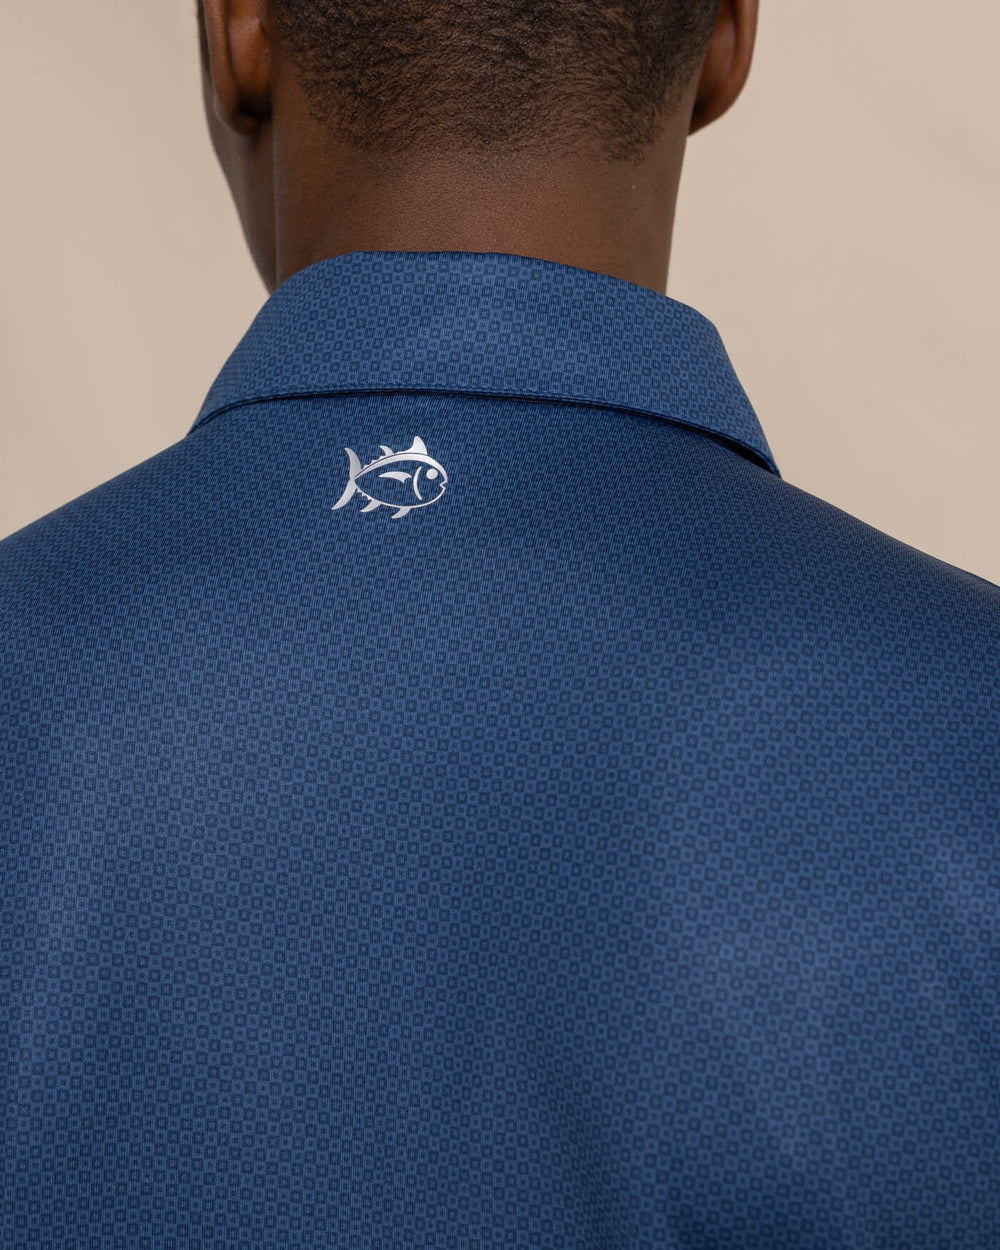 The detail view of the Southern Tide Driver Coastal Geo Polo Shirt by Southern Tide - Dress Blue